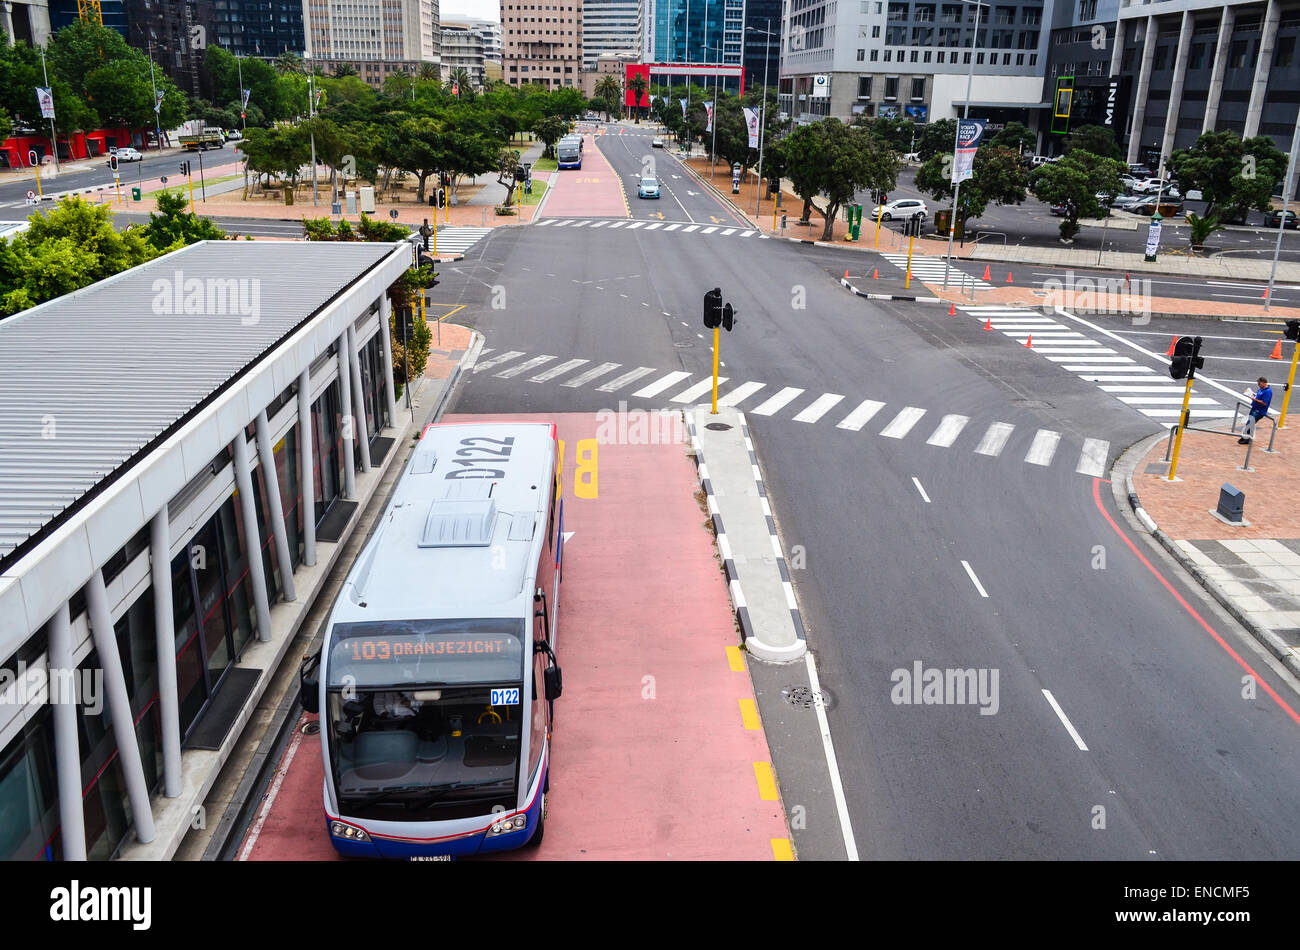 A Myciti bus on an integrated rapid transit (IRT) lane in the city center of Cape Town, South Africa Stock Photo